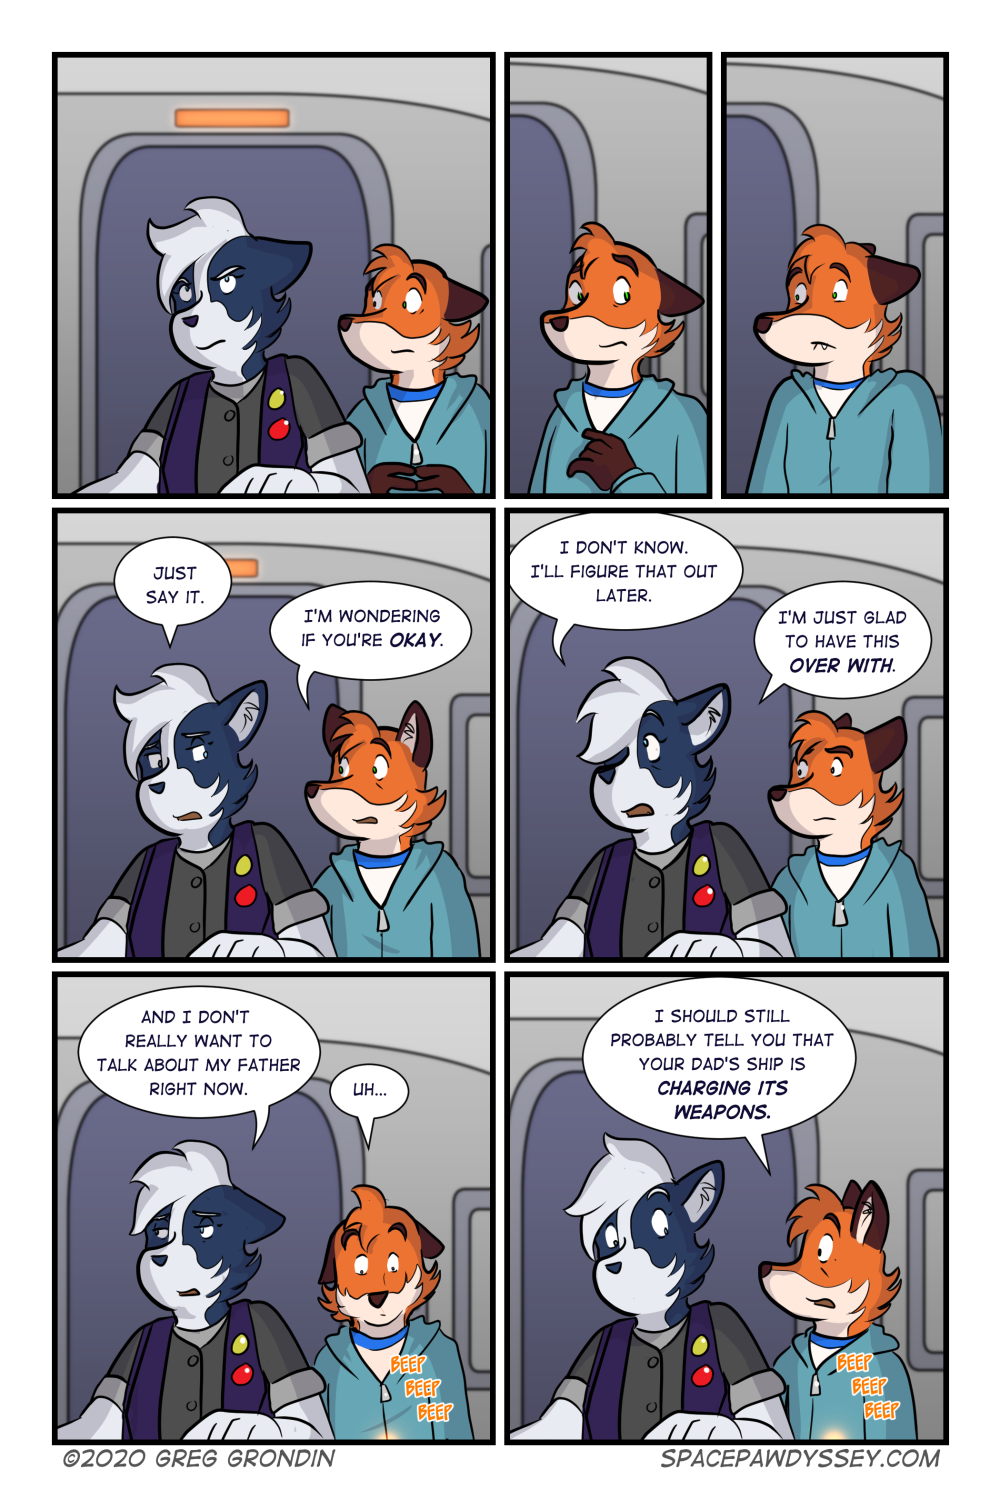 Space Pawdyssey #356